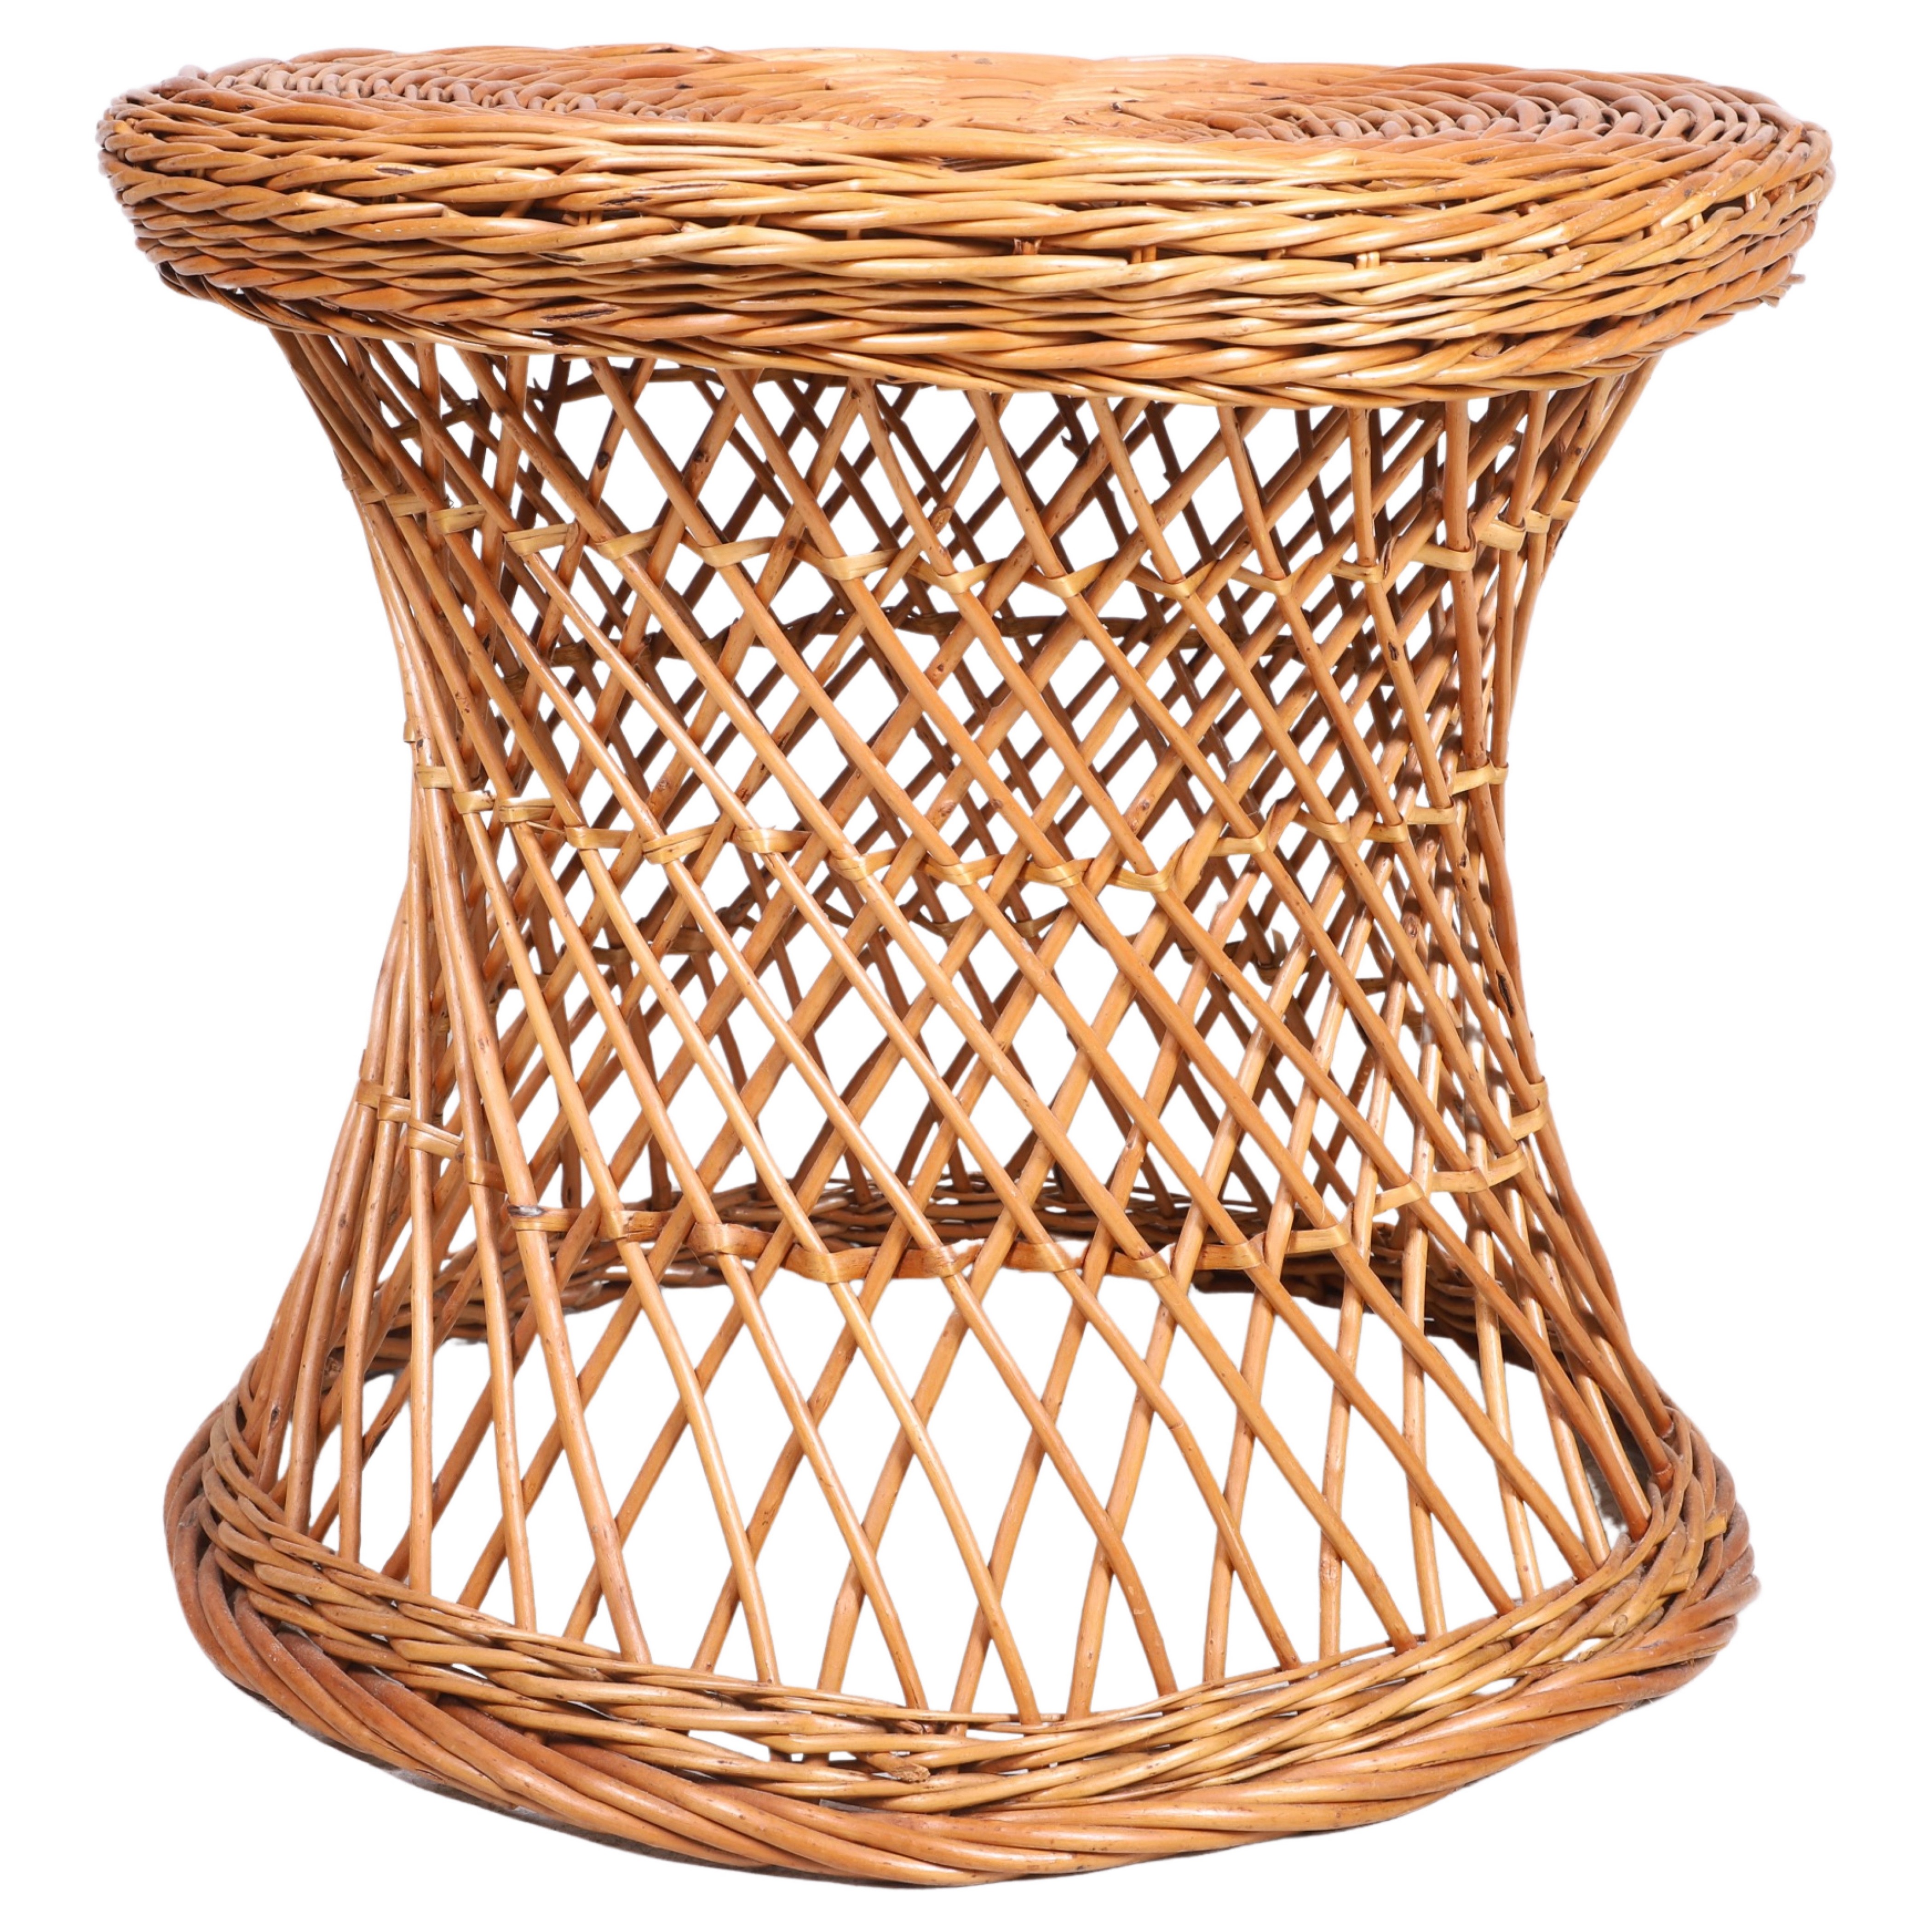 Wicker side table round top 19 3 4 h 30fe84